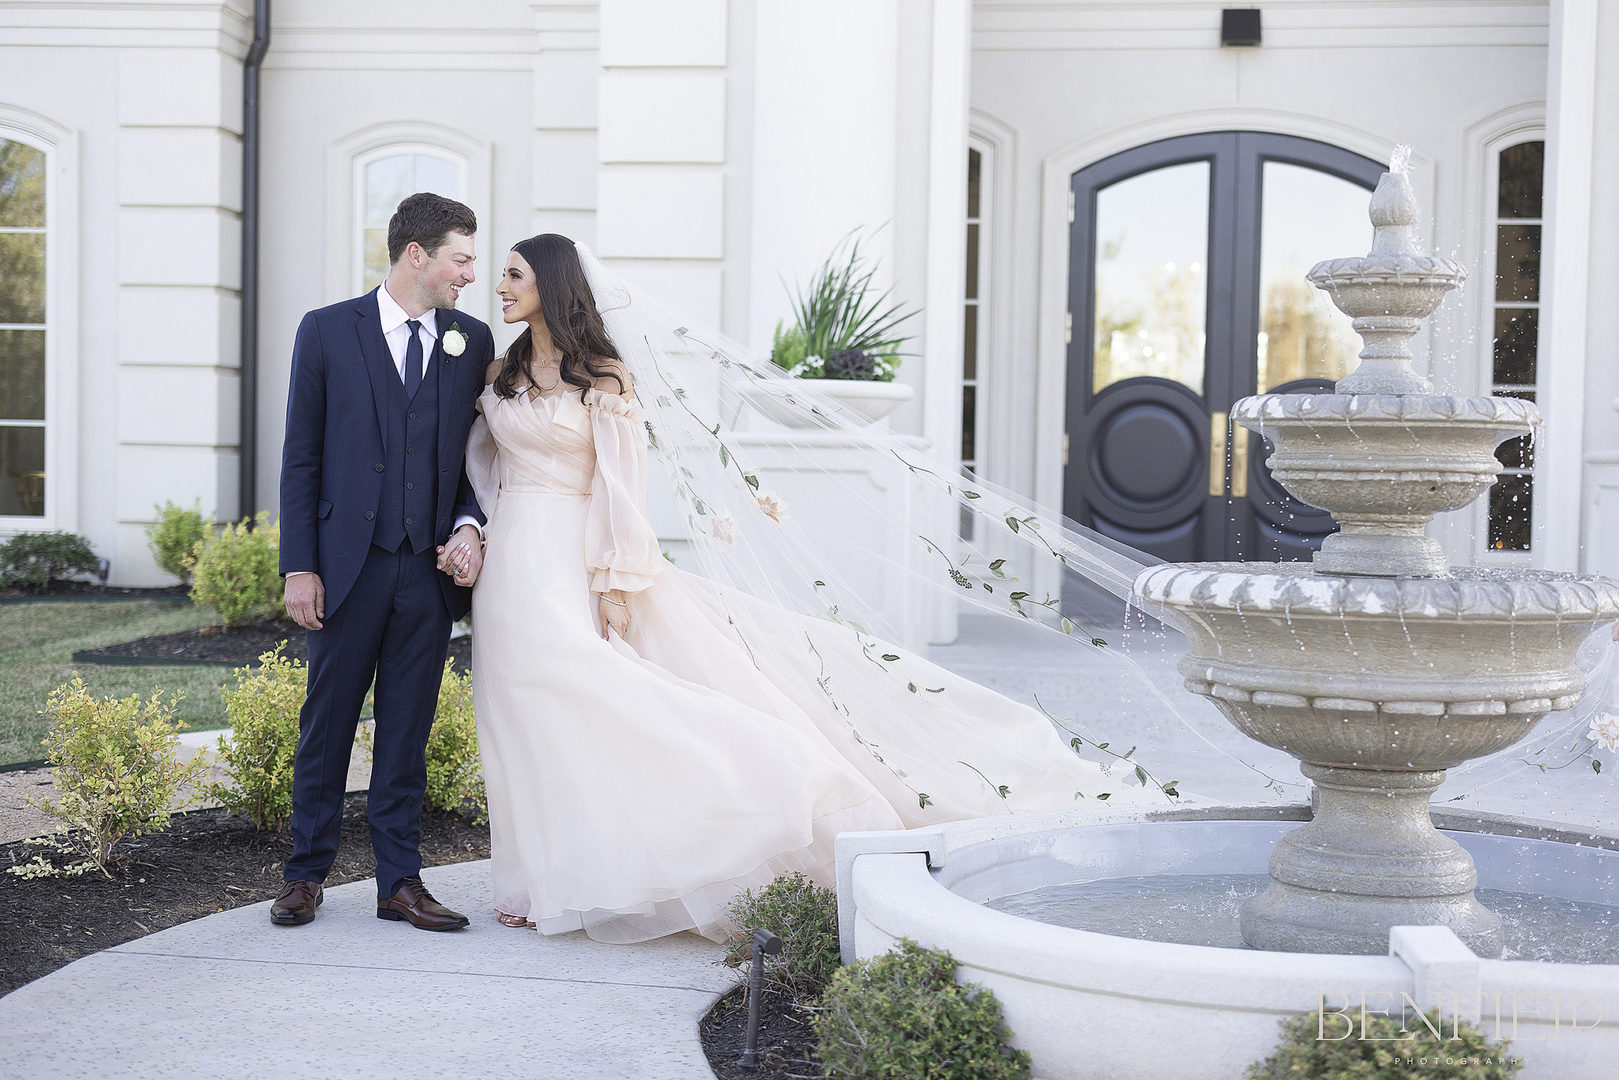 Bride and groom pose near a fountain at Hillside Estate for their wedding portraits.